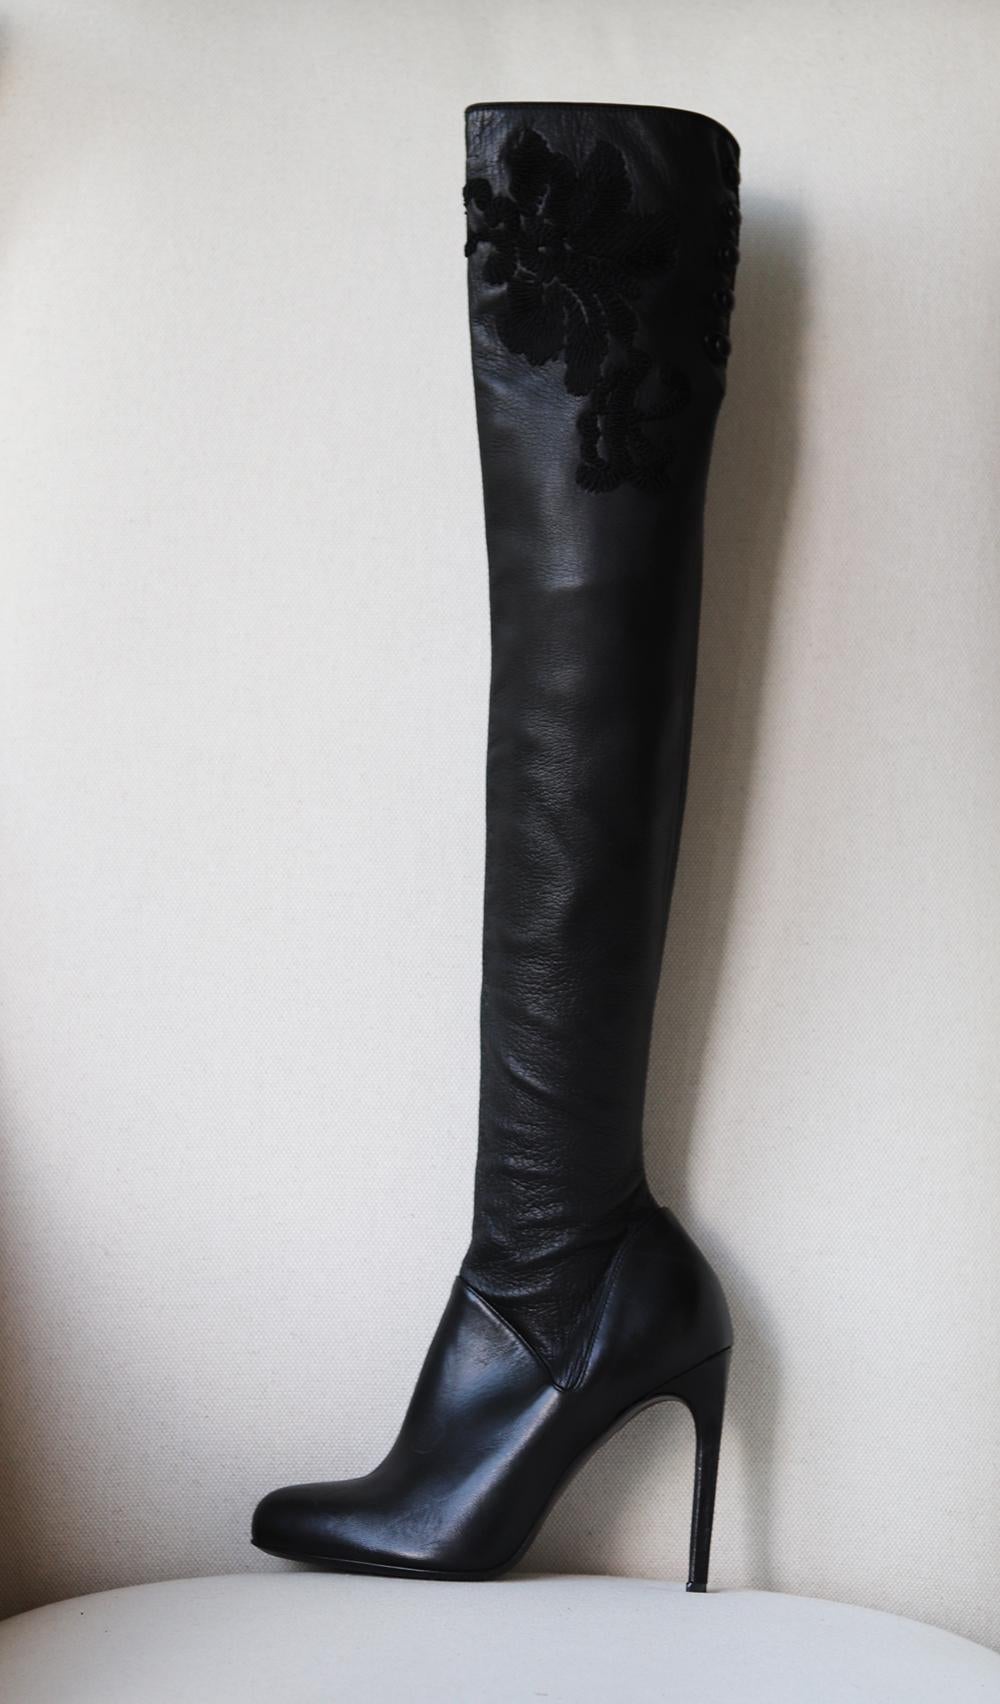 Made in Italy from soft stretch-leather, these boots are intricately designed with floral embroidery along the top along, this sculptural pair is your ticket to some daytime to evening glam. .
Black stretch leather.
Heel measures approximately 100